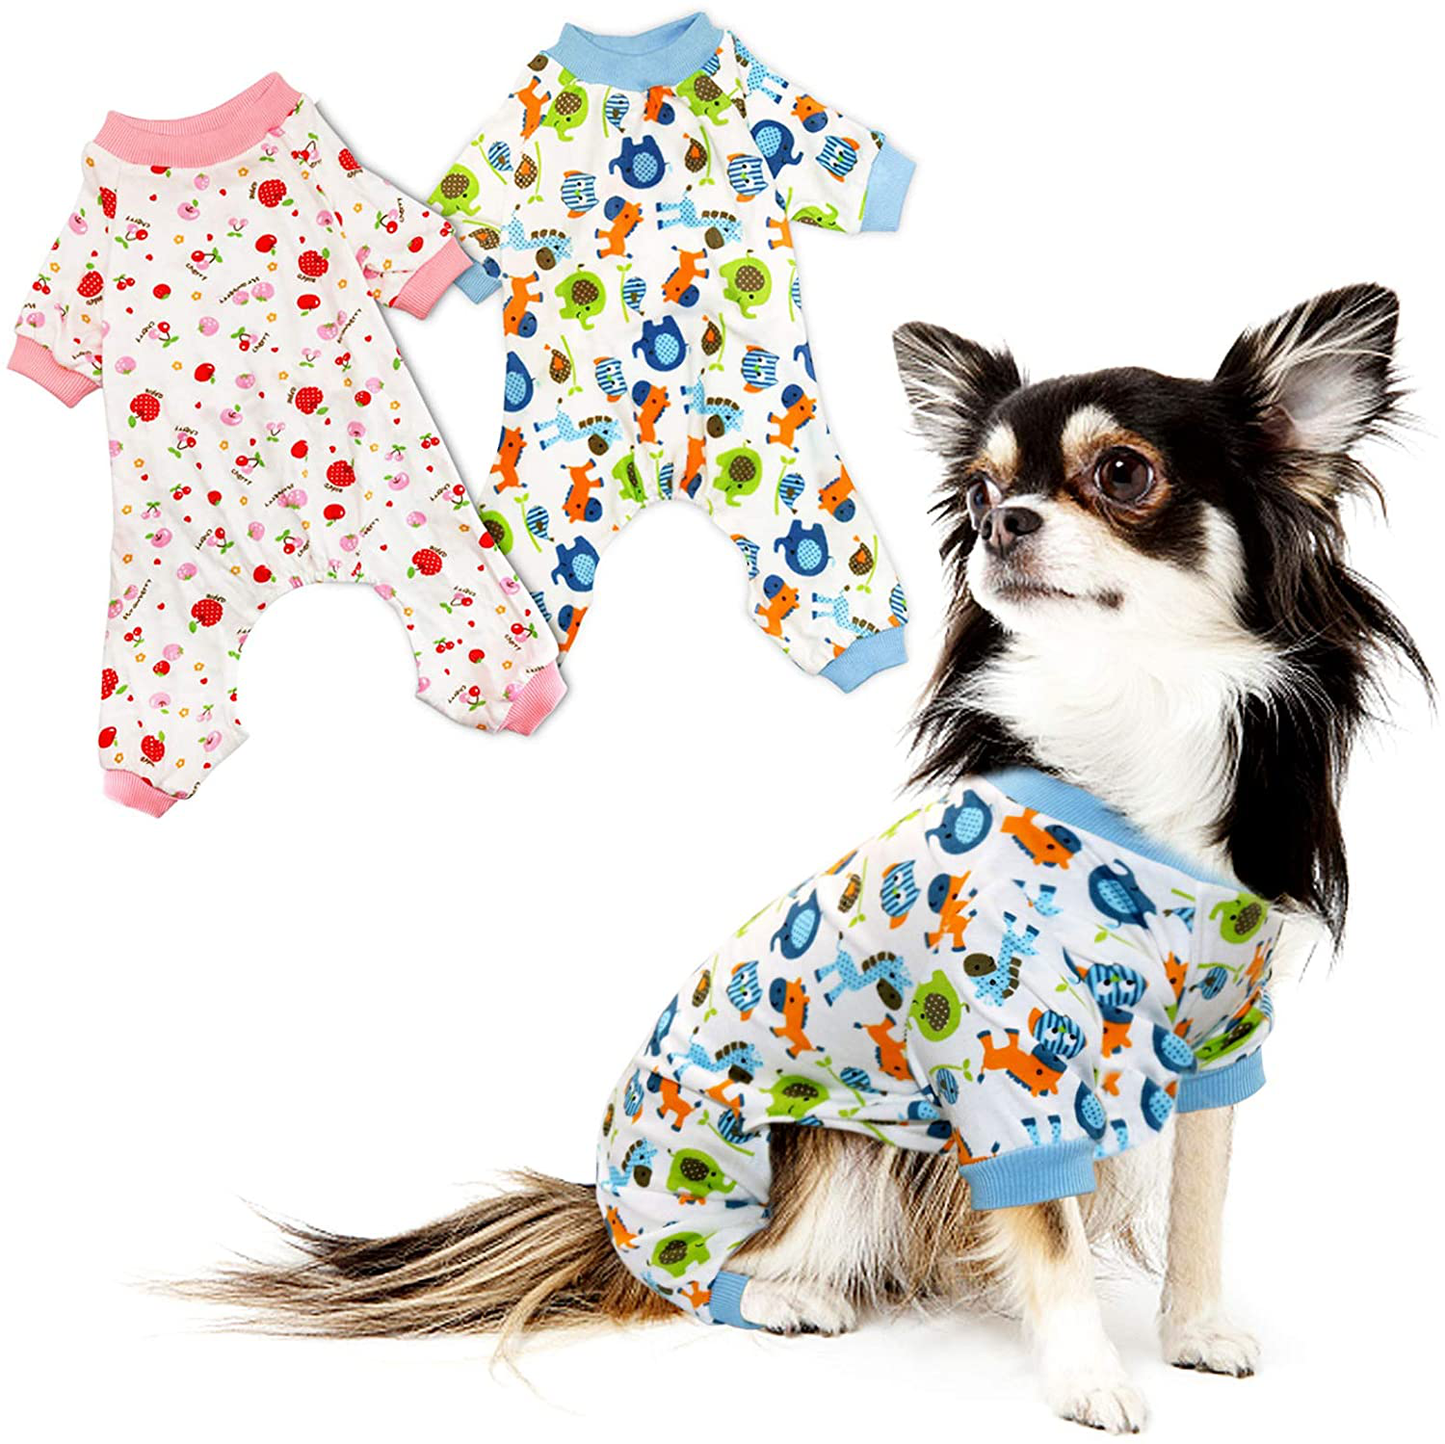 Rypet Small Dog Pajamas 2 Pack - Cute Cat Pajamas Onesie Soft Puppy Rompers Pet Jumpsuits Cozy Bodysuits for Small Dogs and Cats Animals & Pet Supplies > Pet Supplies > Cat Supplies > Cat Apparel Rypet Large (11-15 lbs)  